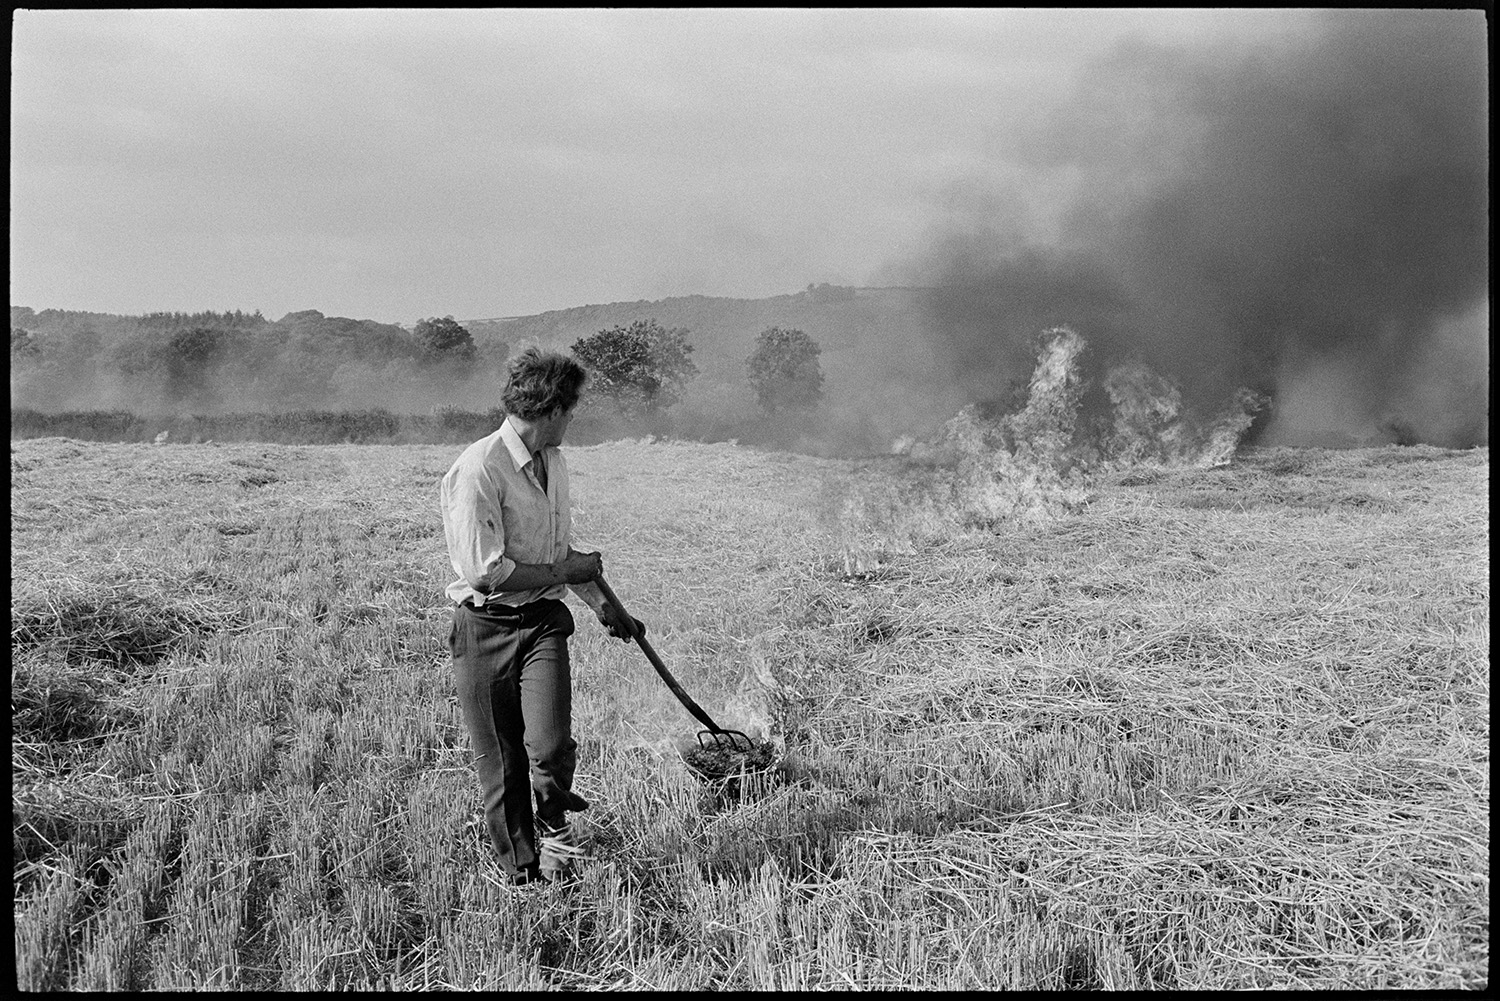 Farmer burning stubble. 
[A man burning crop stubble in a field at Greatwood, Merton. He is using a fork to light the stubble. Black smoke is rising from the stubble already alight.]